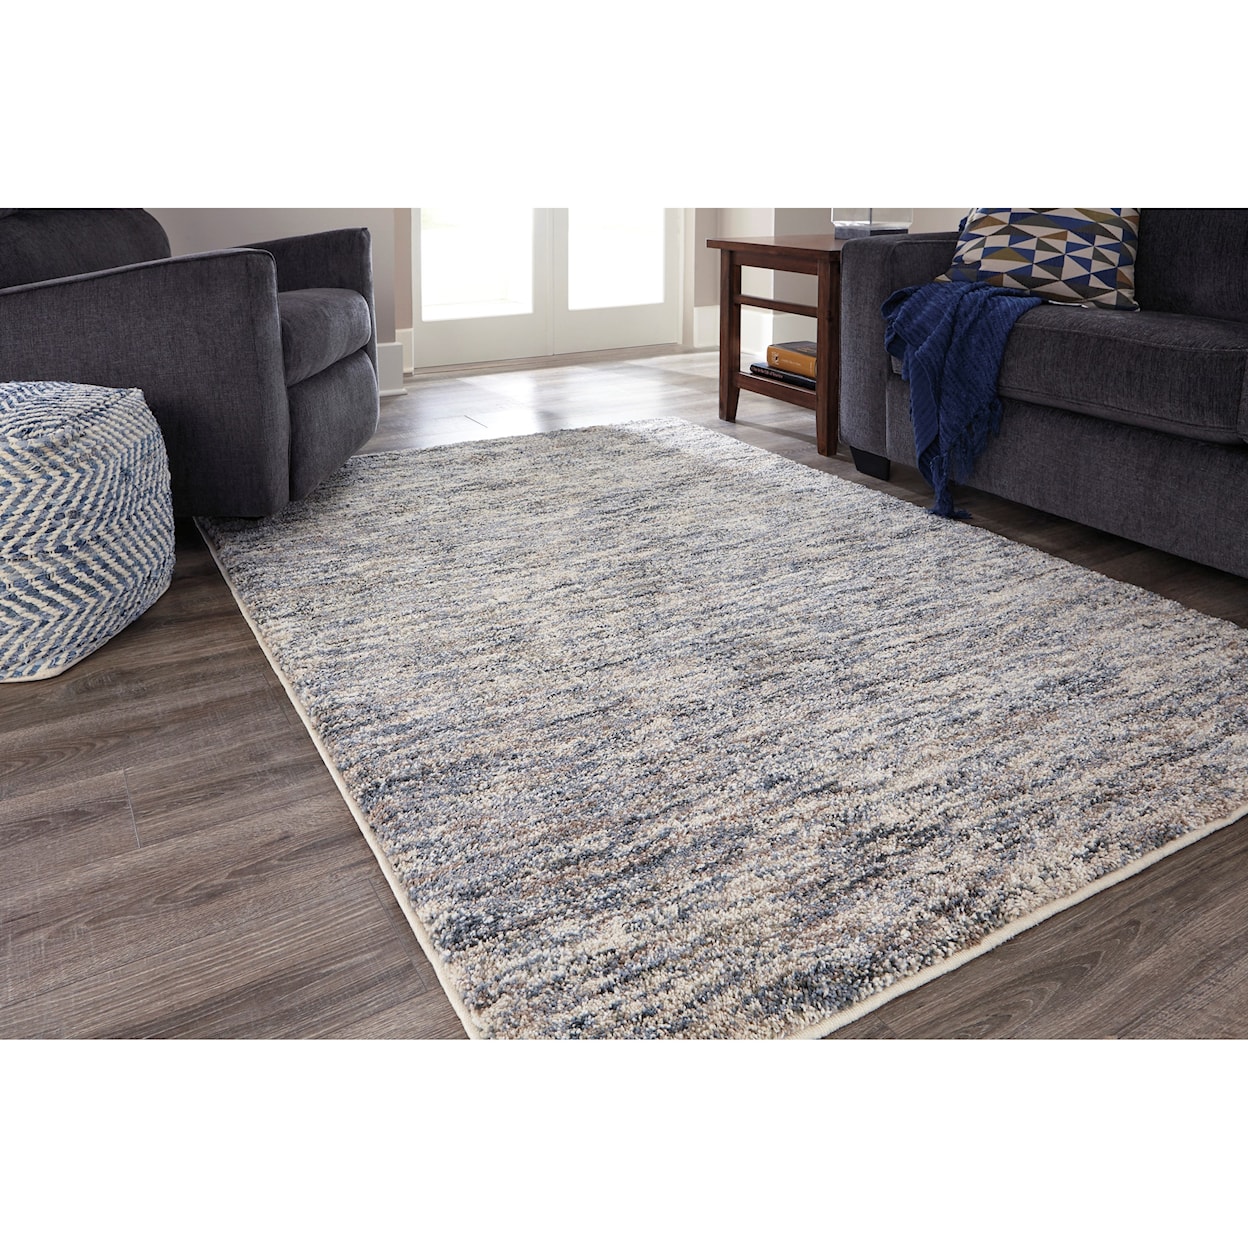 Signature Design by Ashley Contemporary Area Rugs 8x10 Rug